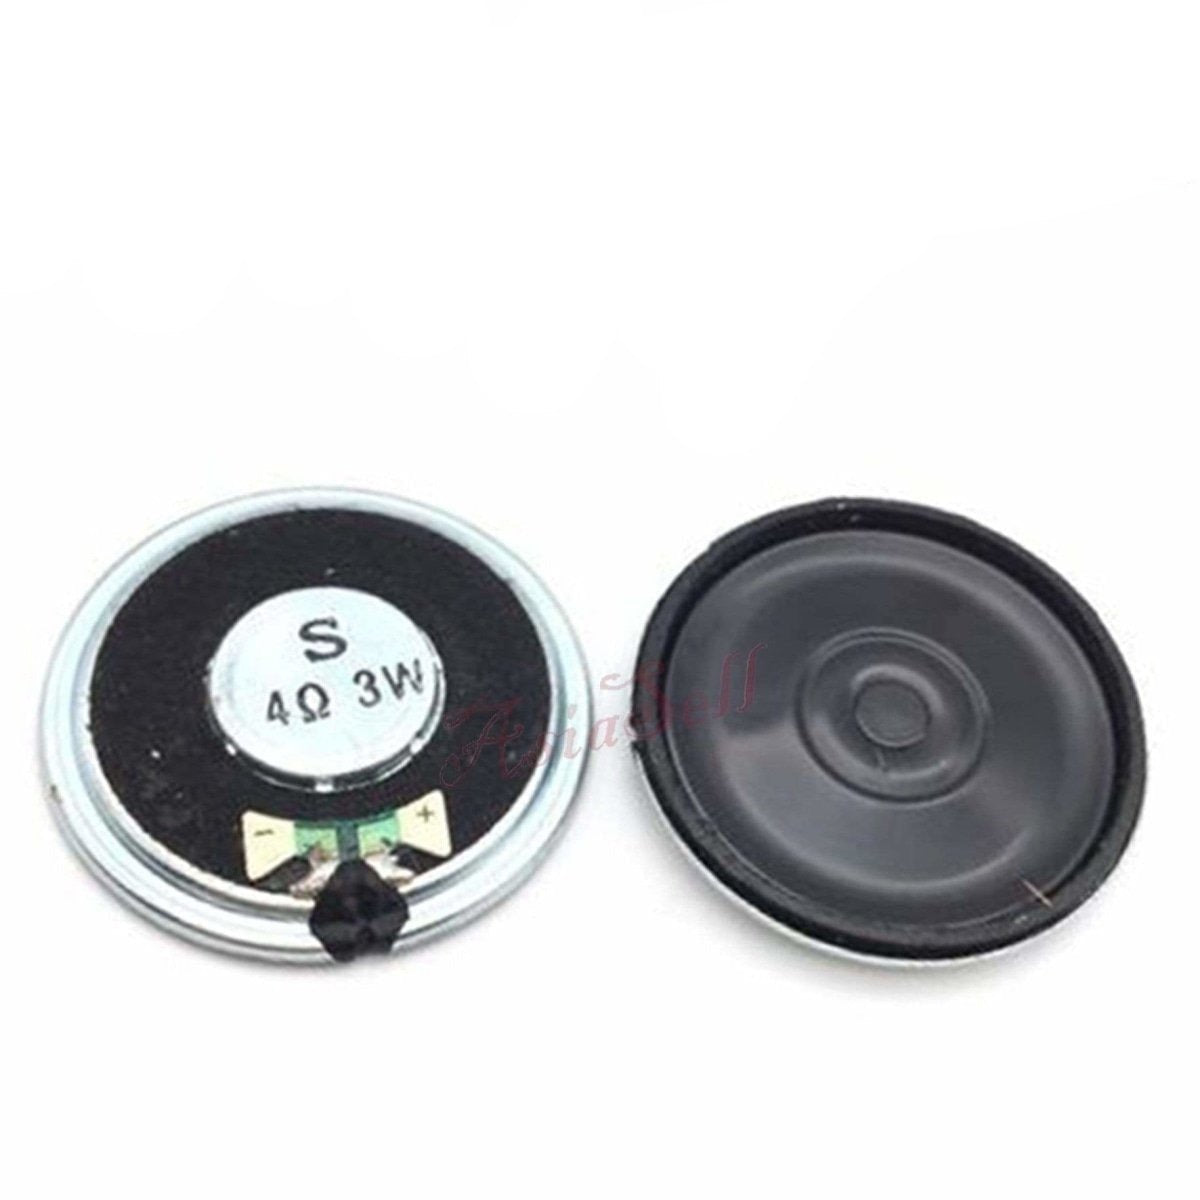 2pcs Speaker Horn 0.25-3W 4-32ohm Ultra Thin Horns Speakers - 3W 4R 40mm ultra thin - - Asia Sell